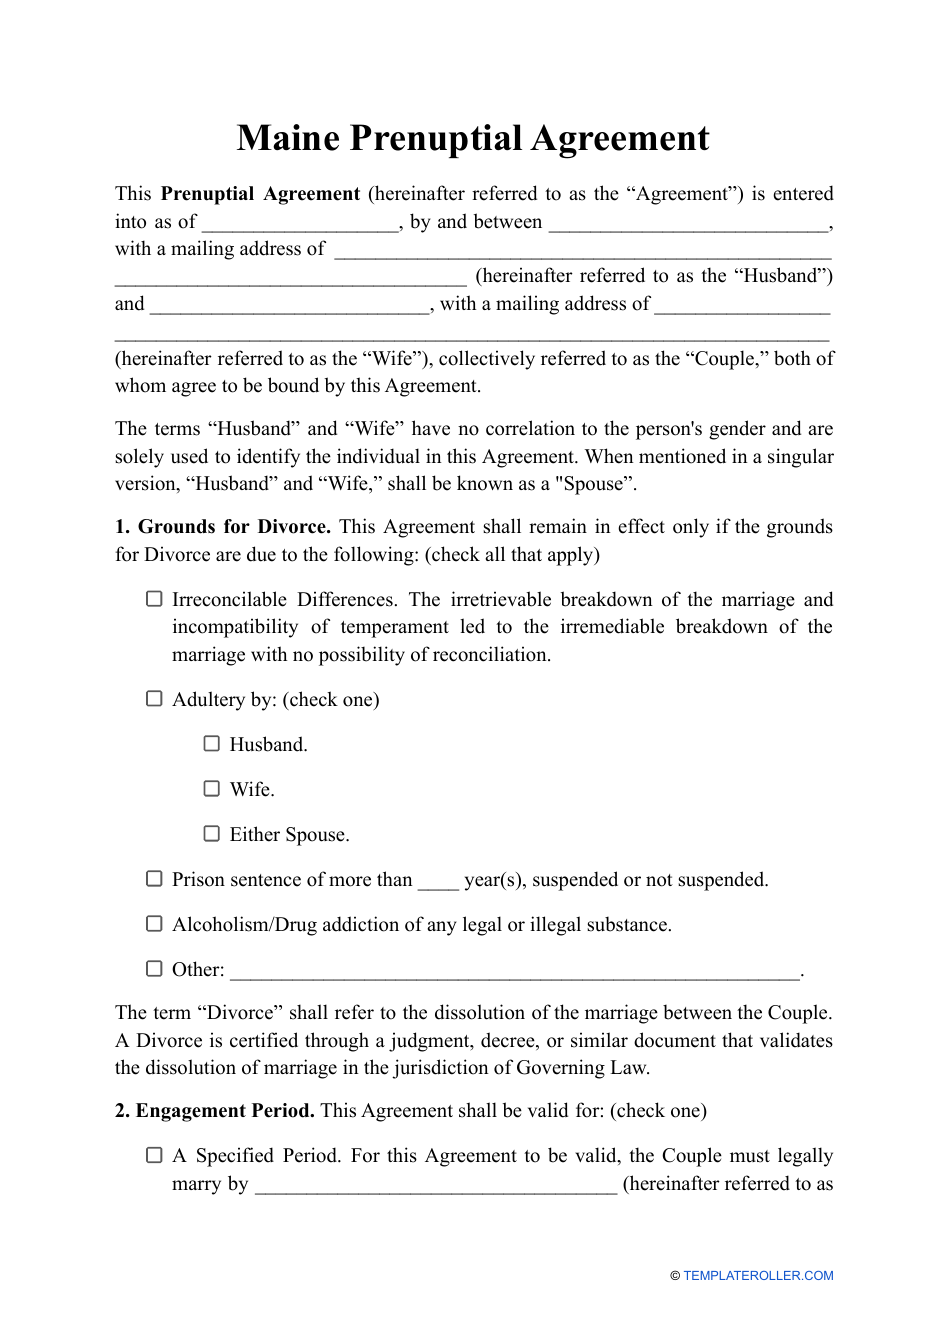 Prenuptial Agreement Template - Maine, Page 1